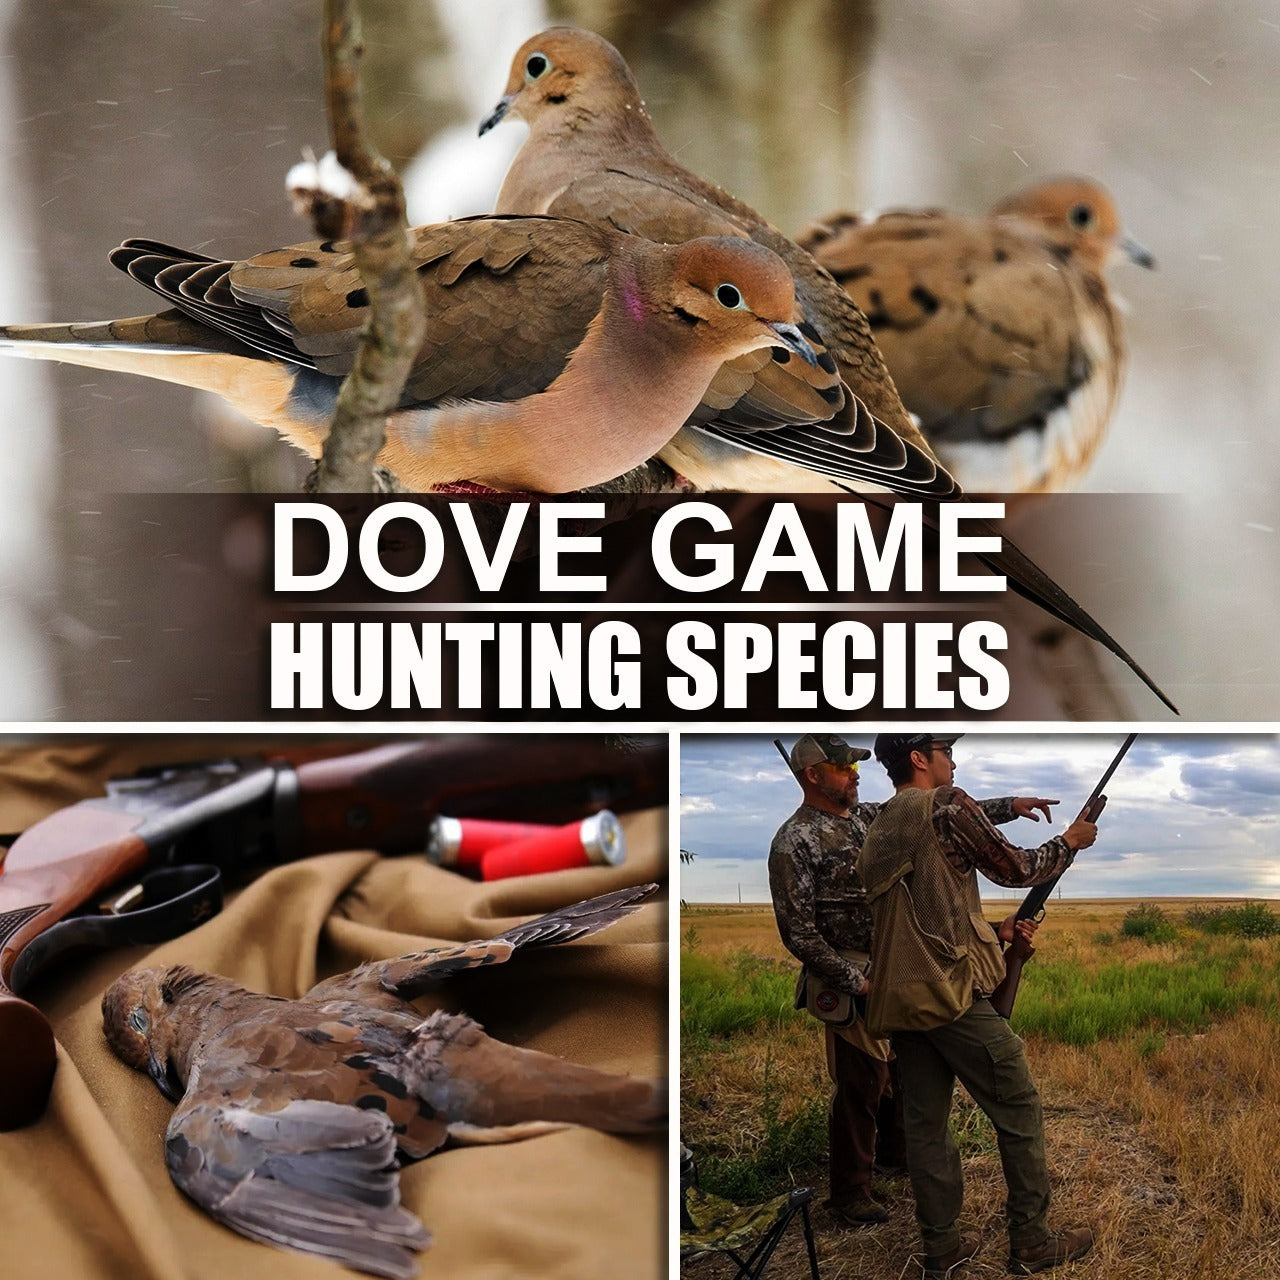 Dove Game Hunting Species